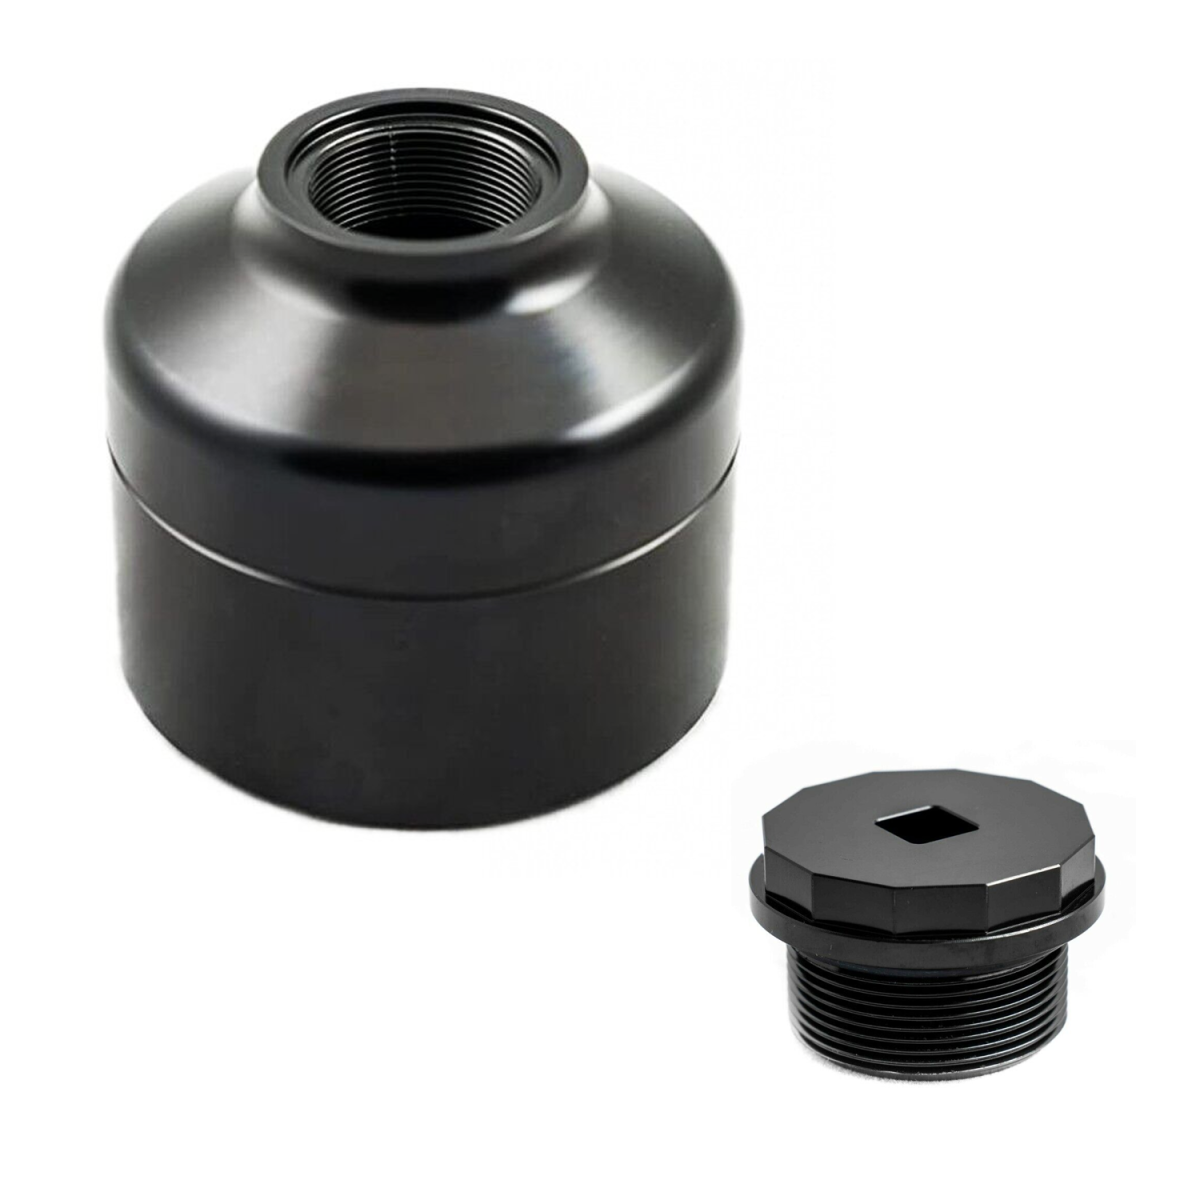 Rudy's Performance Parts - Rudy's Black Fuel Filter Bypass w/ WIF Plug For 01-16 GM 6.6L Duramax LB7 LLY LBZ LMM LML